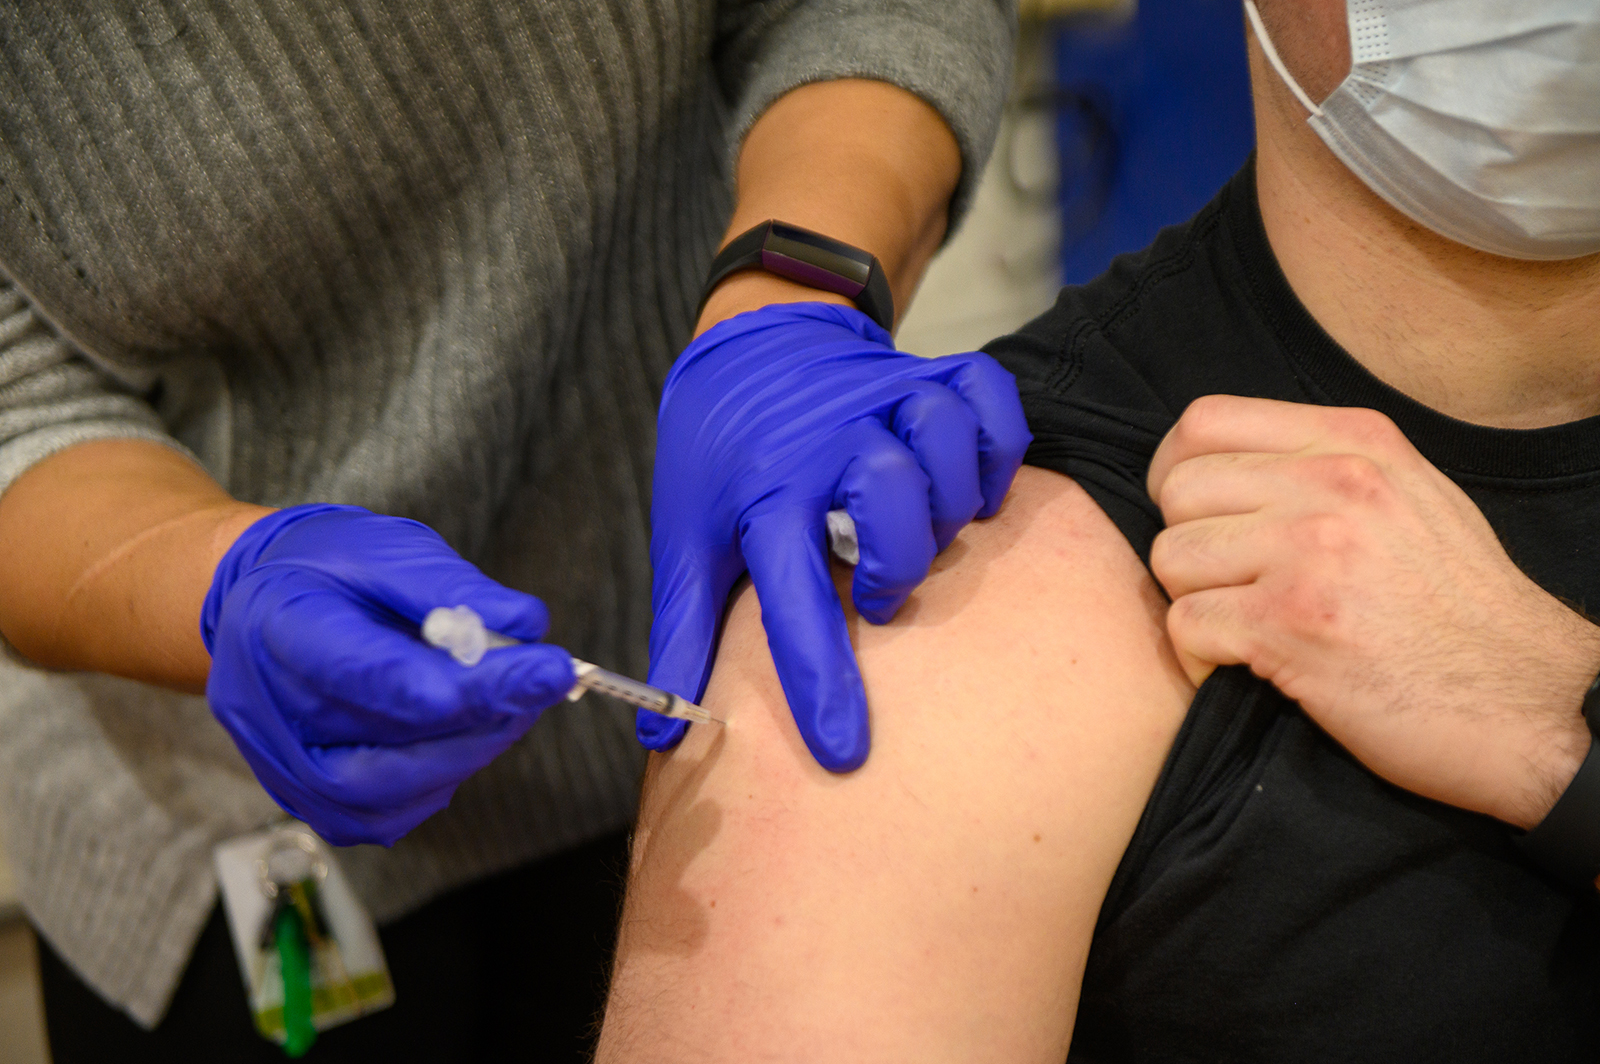 A Holy Name Medical Center healthcare worker administers the Pfizer BioNtech Covid-19 vaccine to a law enforcement officer at the Rodda Community Center in Teaneck, New Jersey, on January 13.